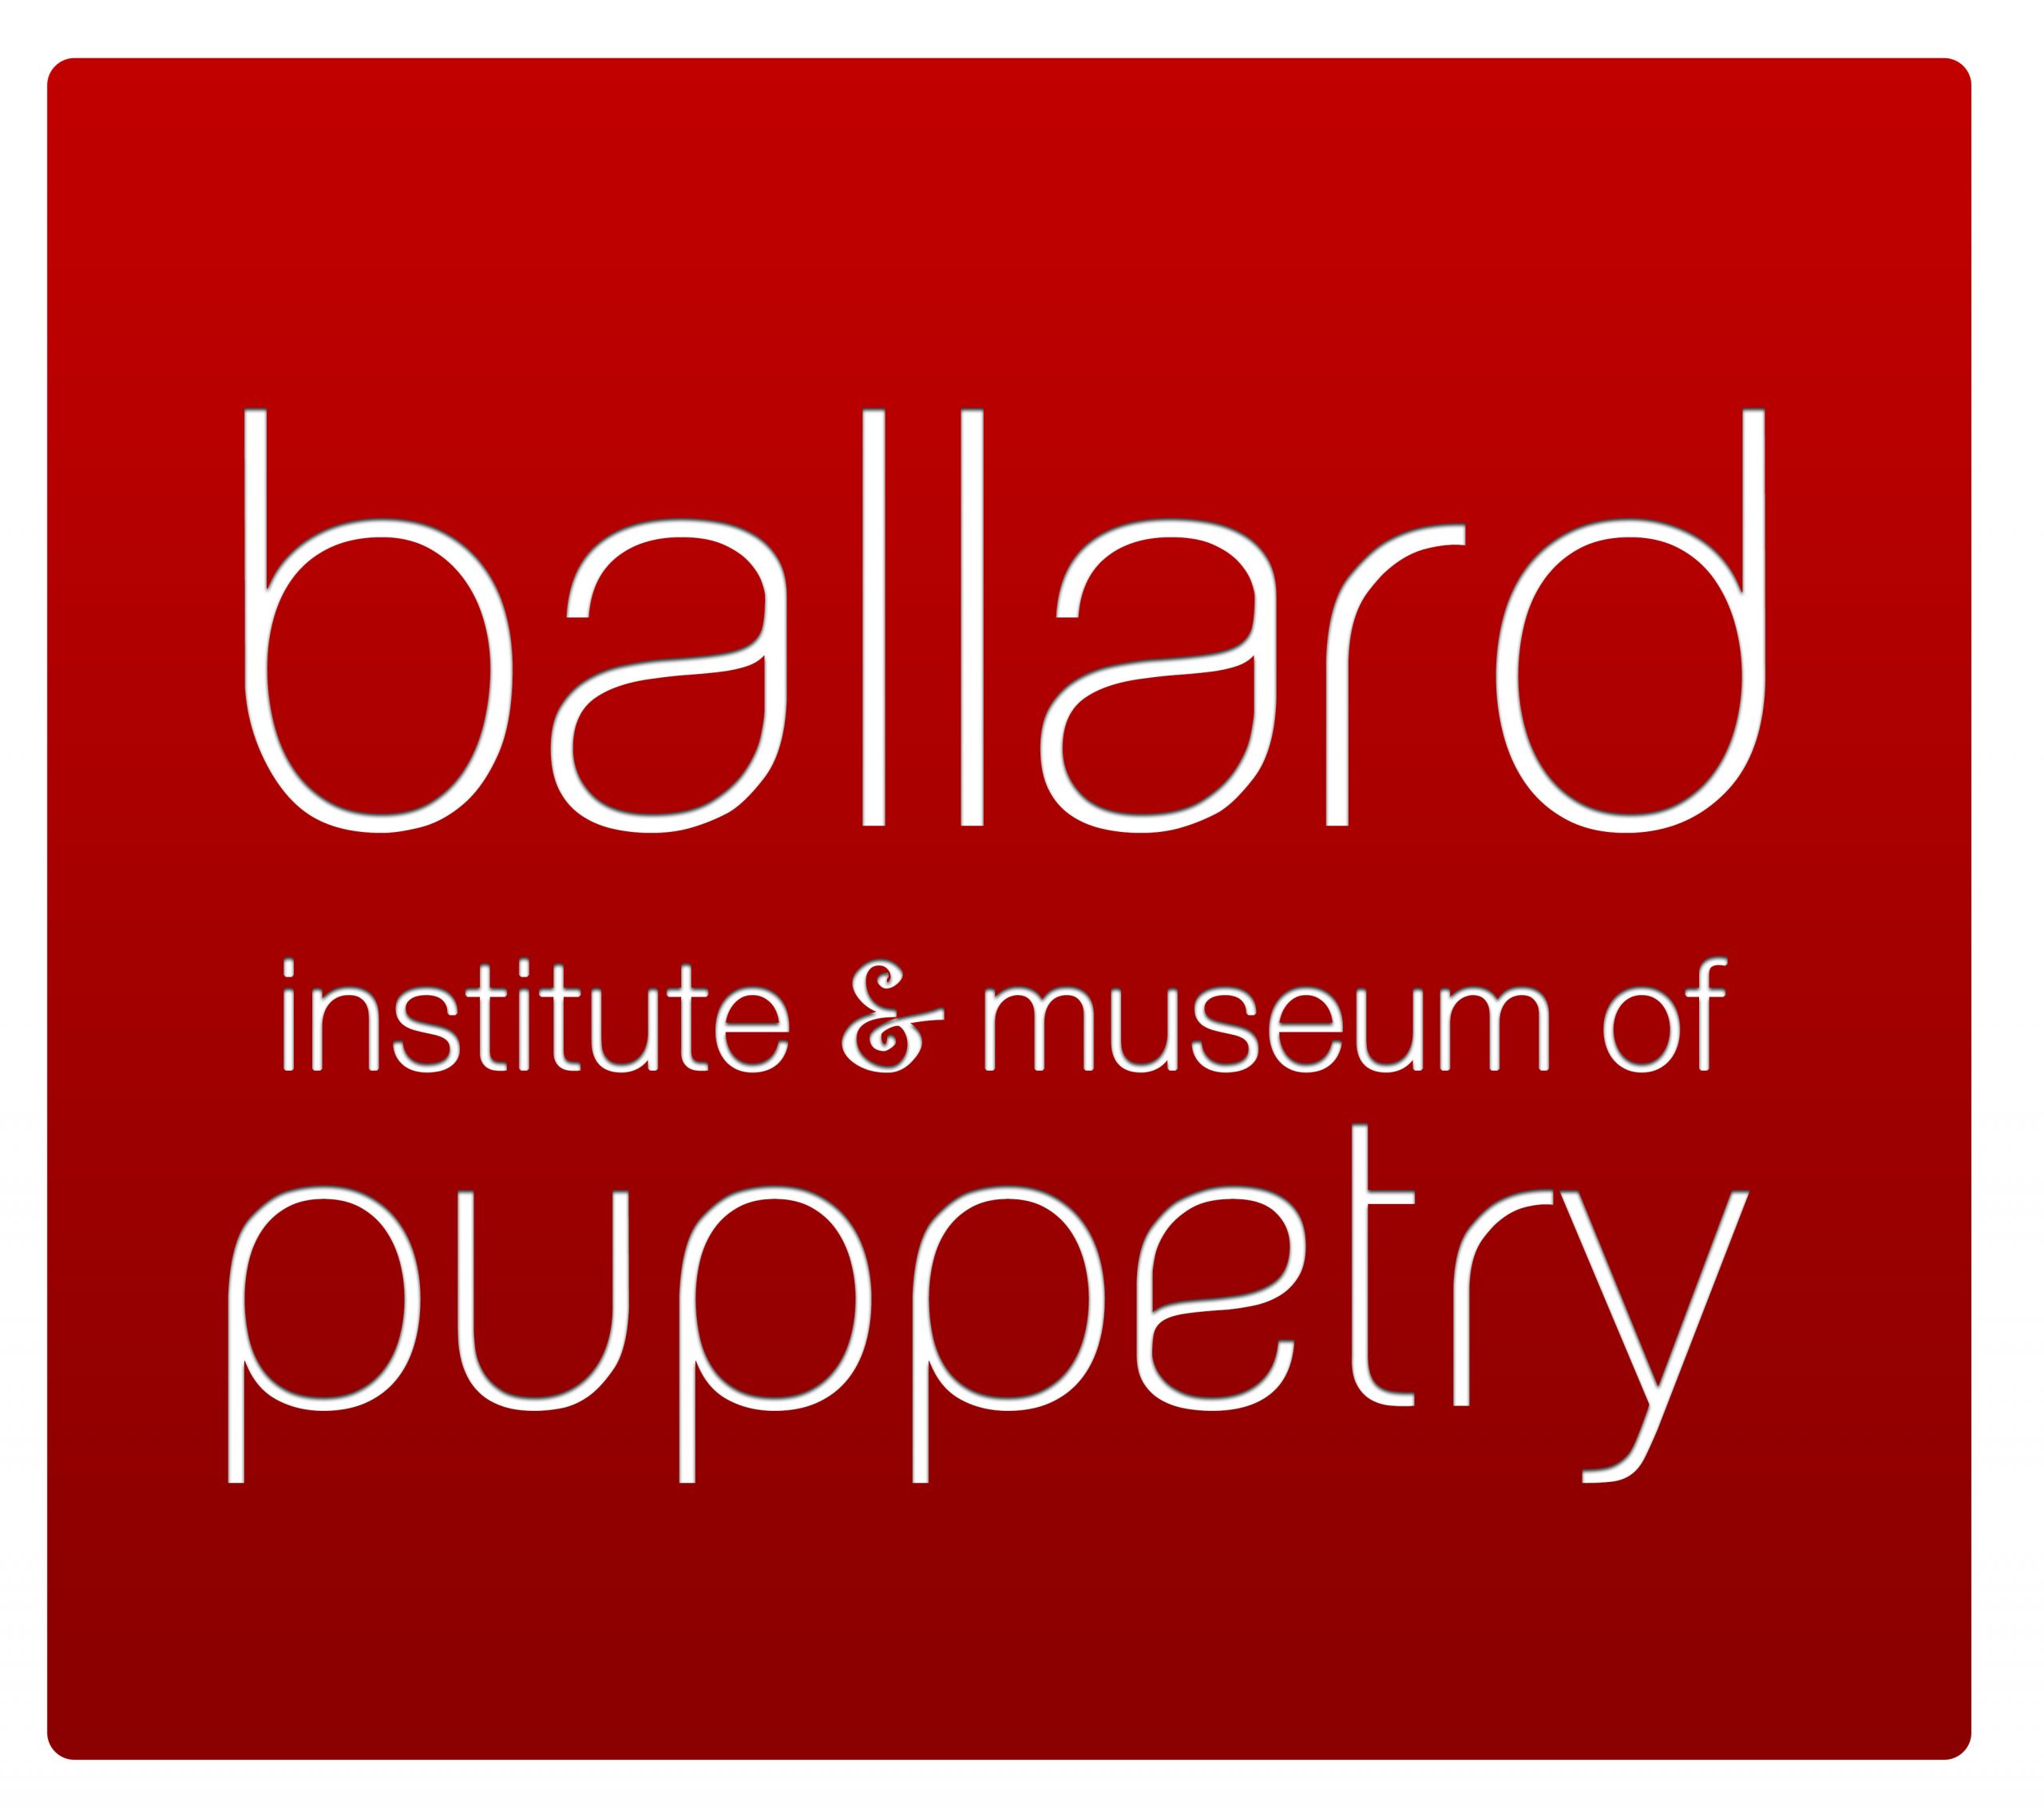 Ballard Institute & Museum of Puppetry (white letters on red background)